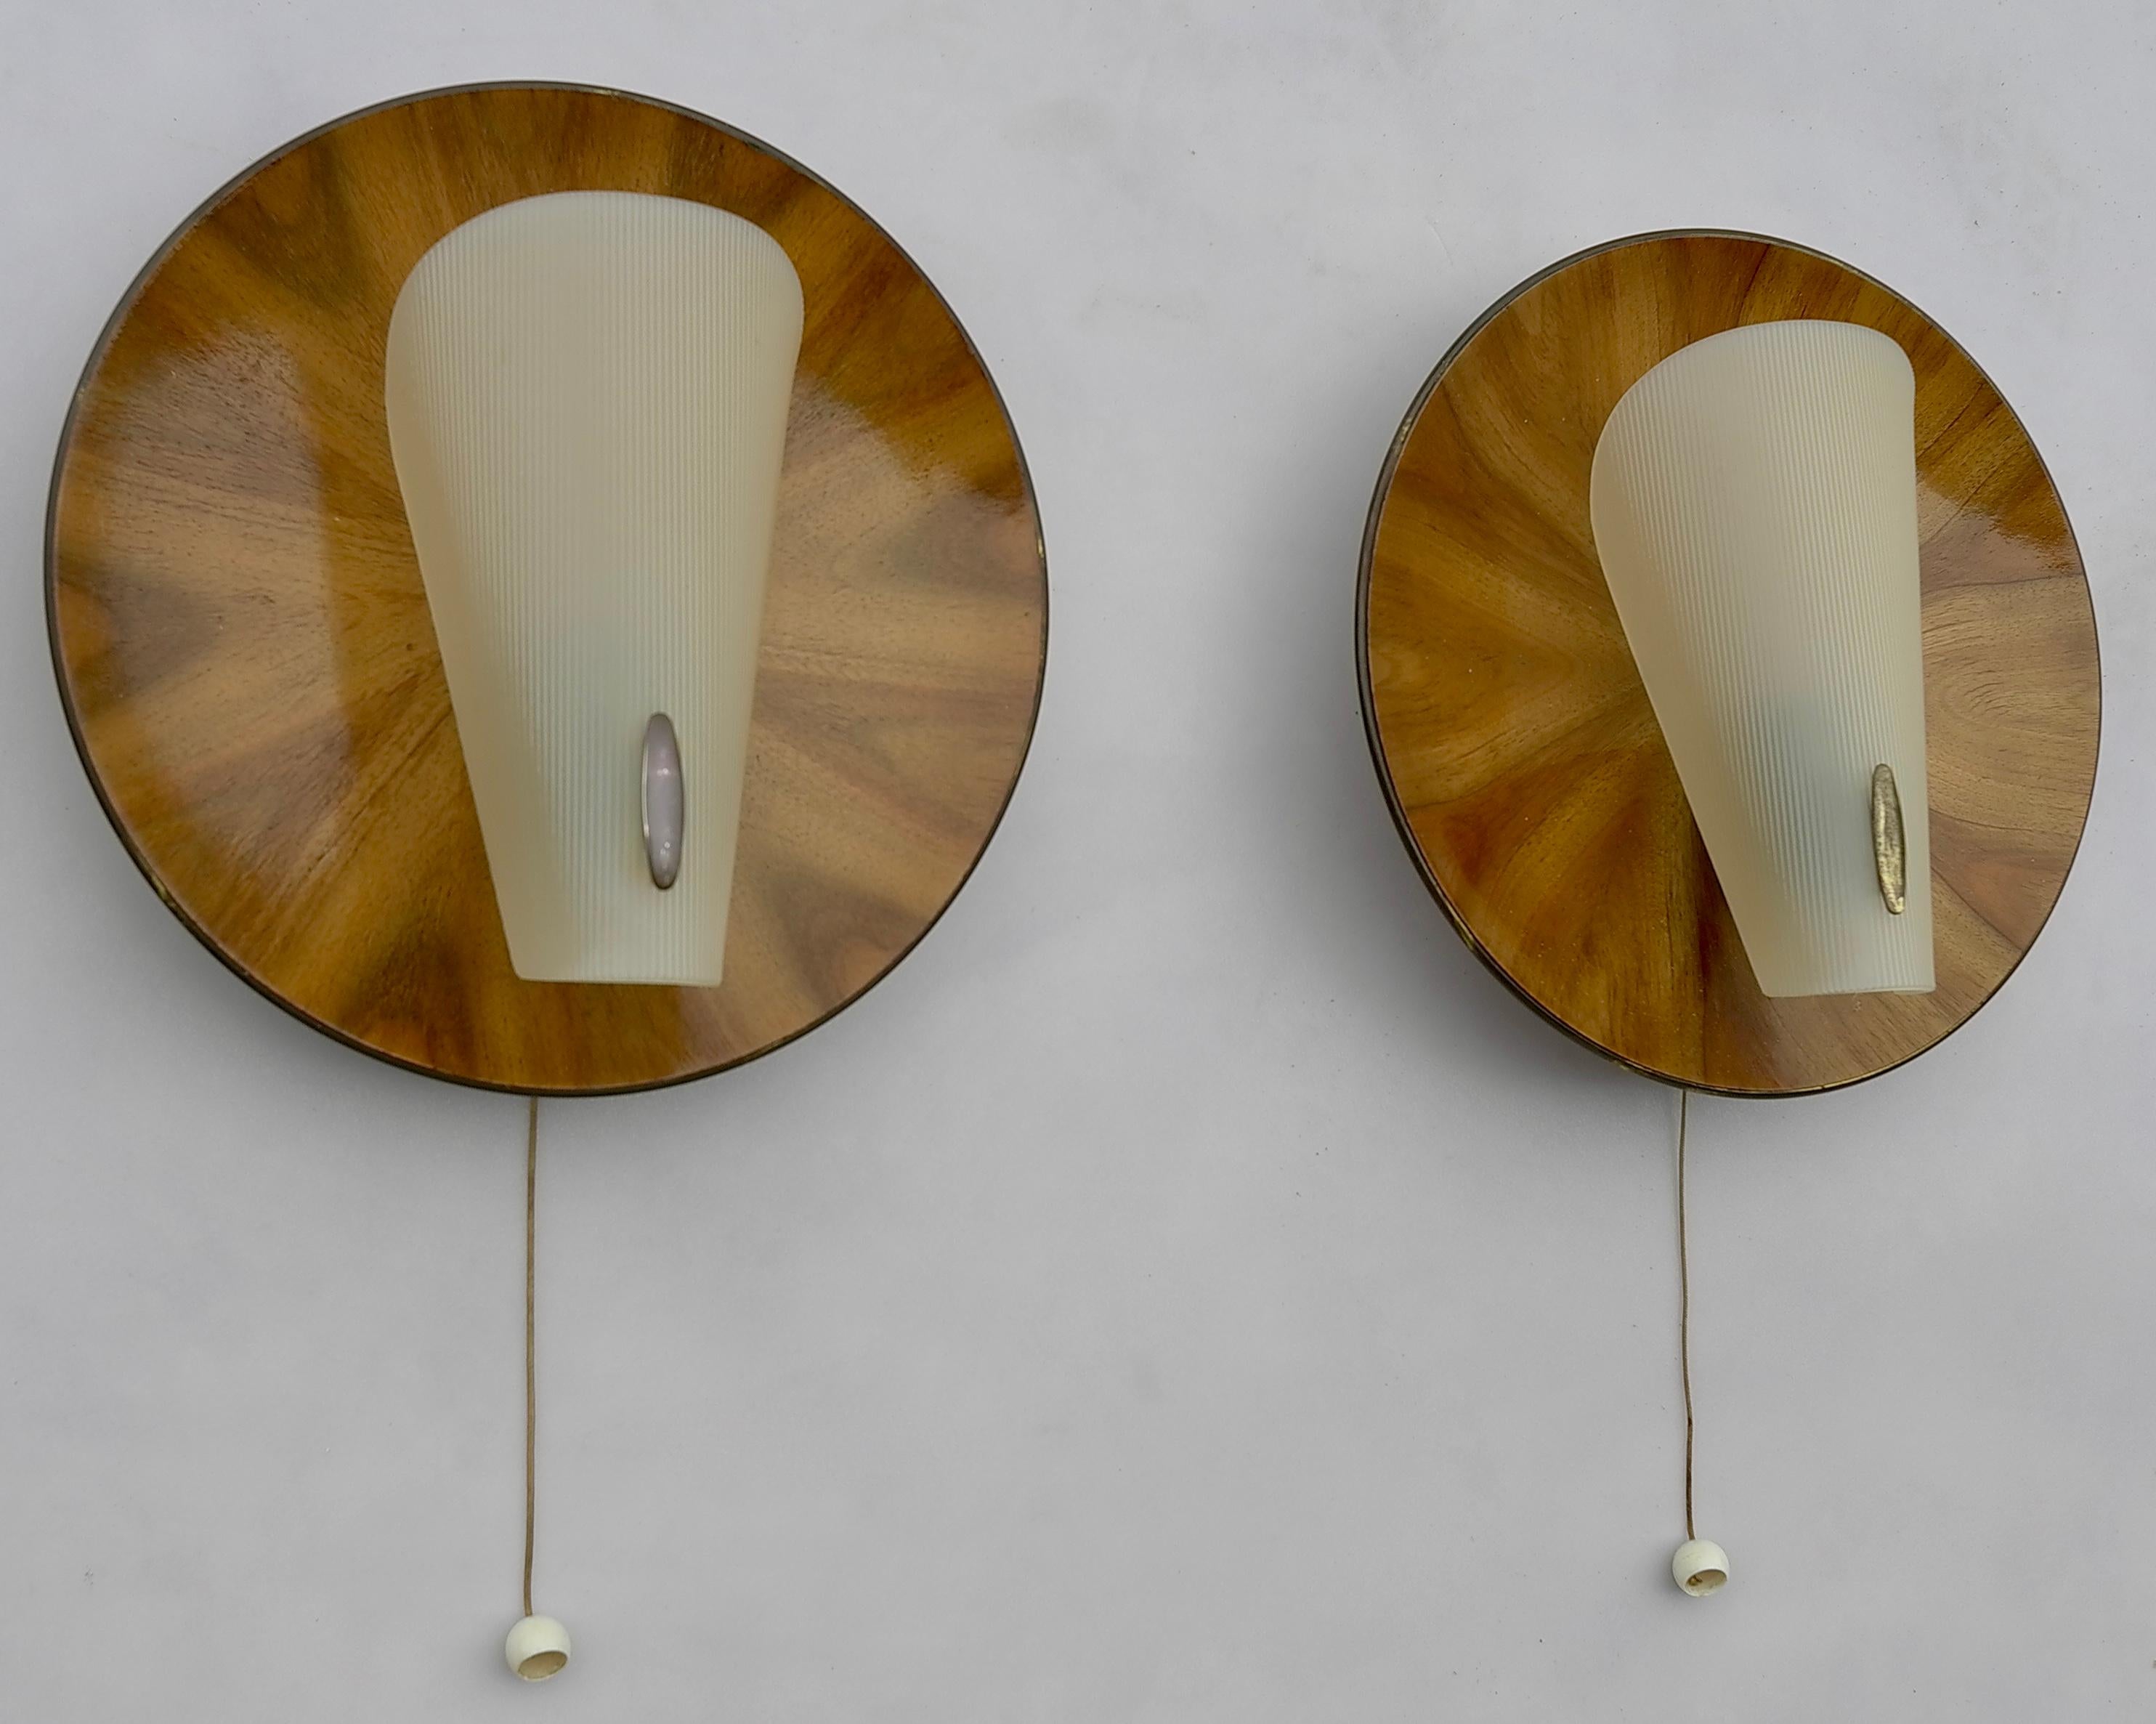 Pair of wooden wall bed lamps with fine brass details, Italy 1950s.